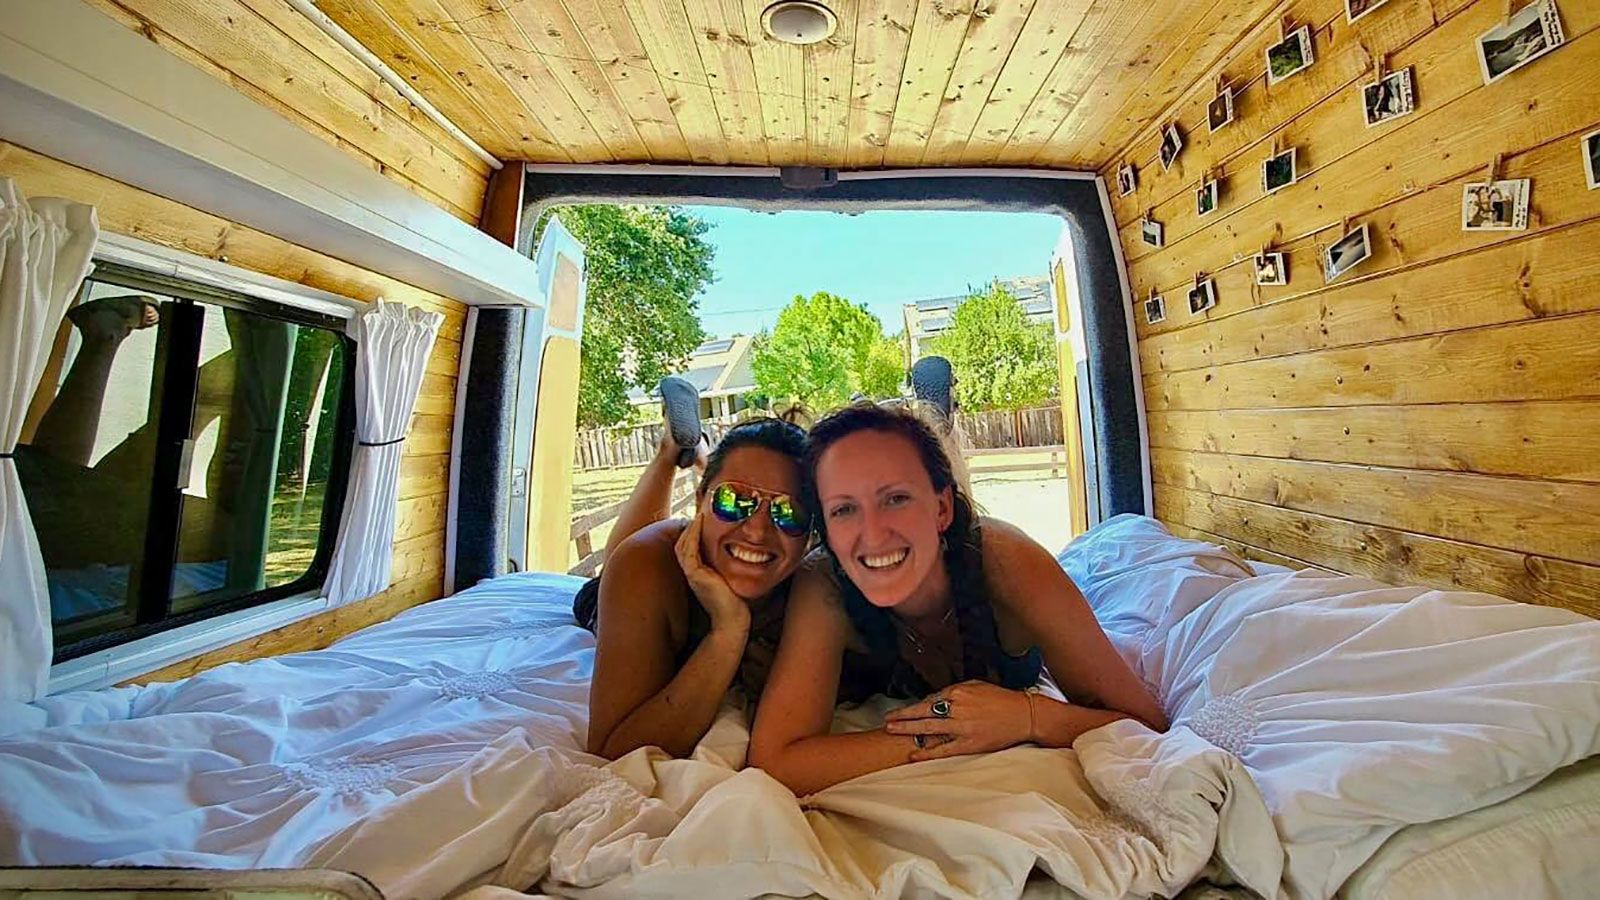 Van life looks idyllic on social media. But for couples, it can be  challenging